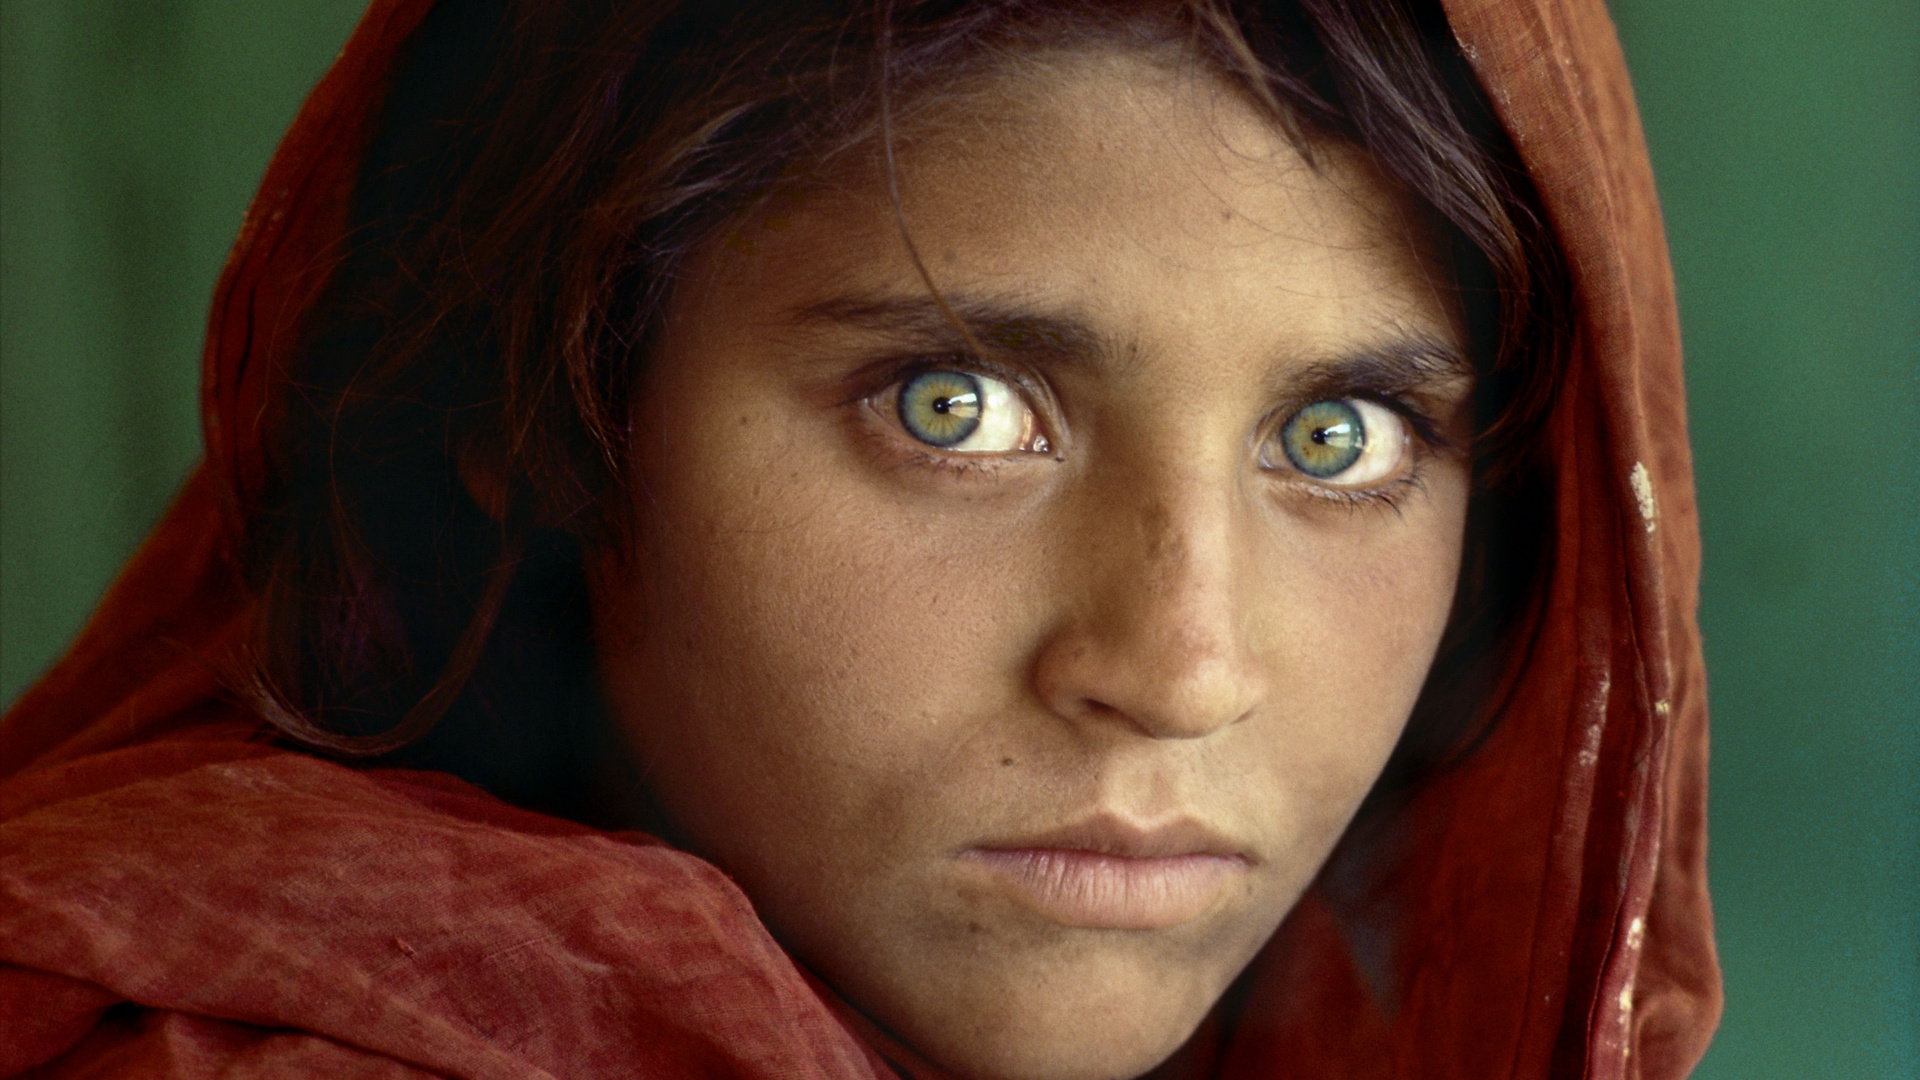 Fille Afghane, Afghanistan, National Geographic, Face, Front. Wallpaper in 1920x1080 Resolution